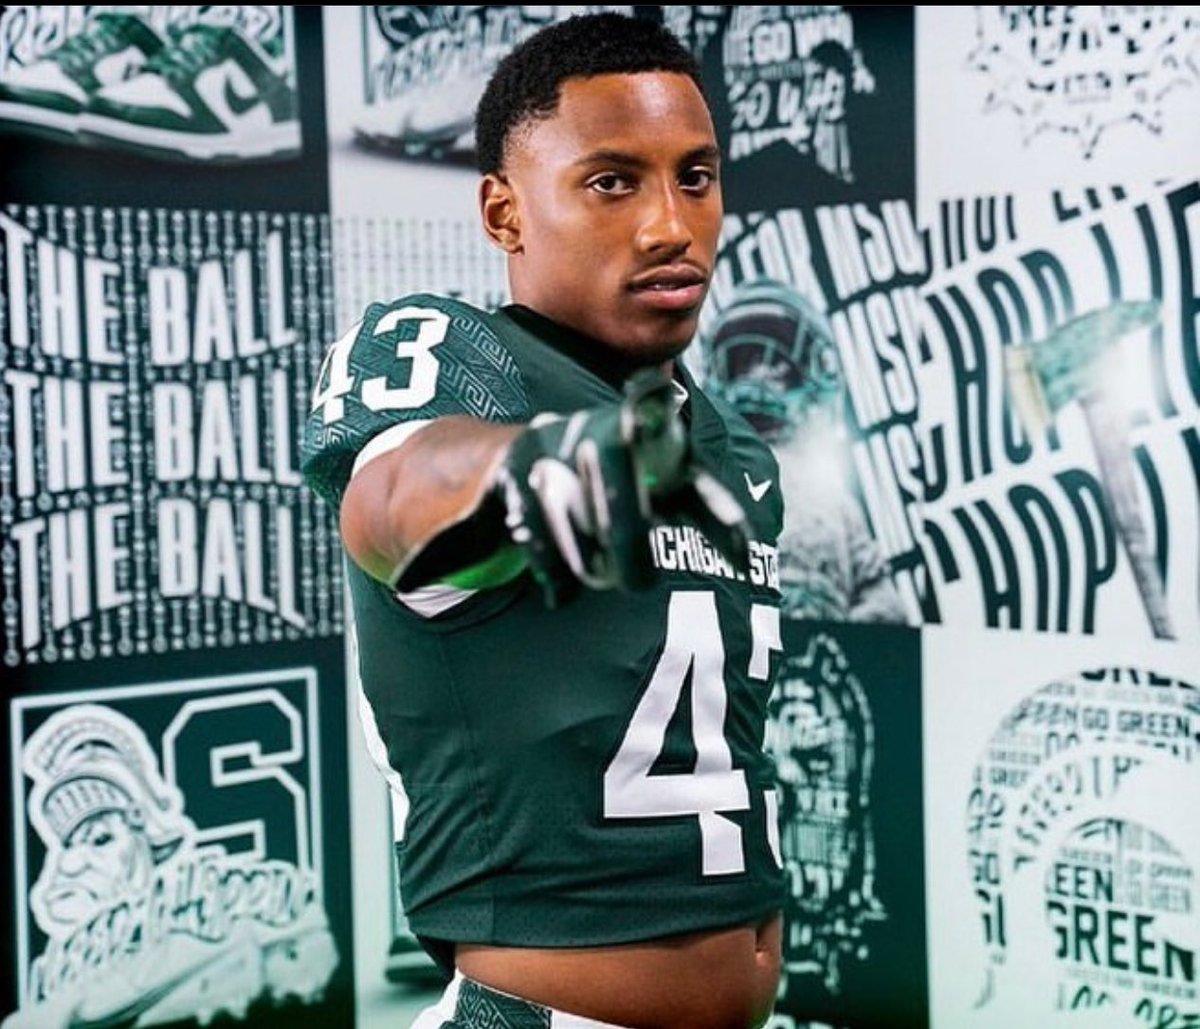 TUESDAY @MalikSpencerMSU Michigan State football safety joins the show! 📺 This Is Sparta MSU show #167 YouTube or any podcast platform #msufootball #michiganstate #collegefootball